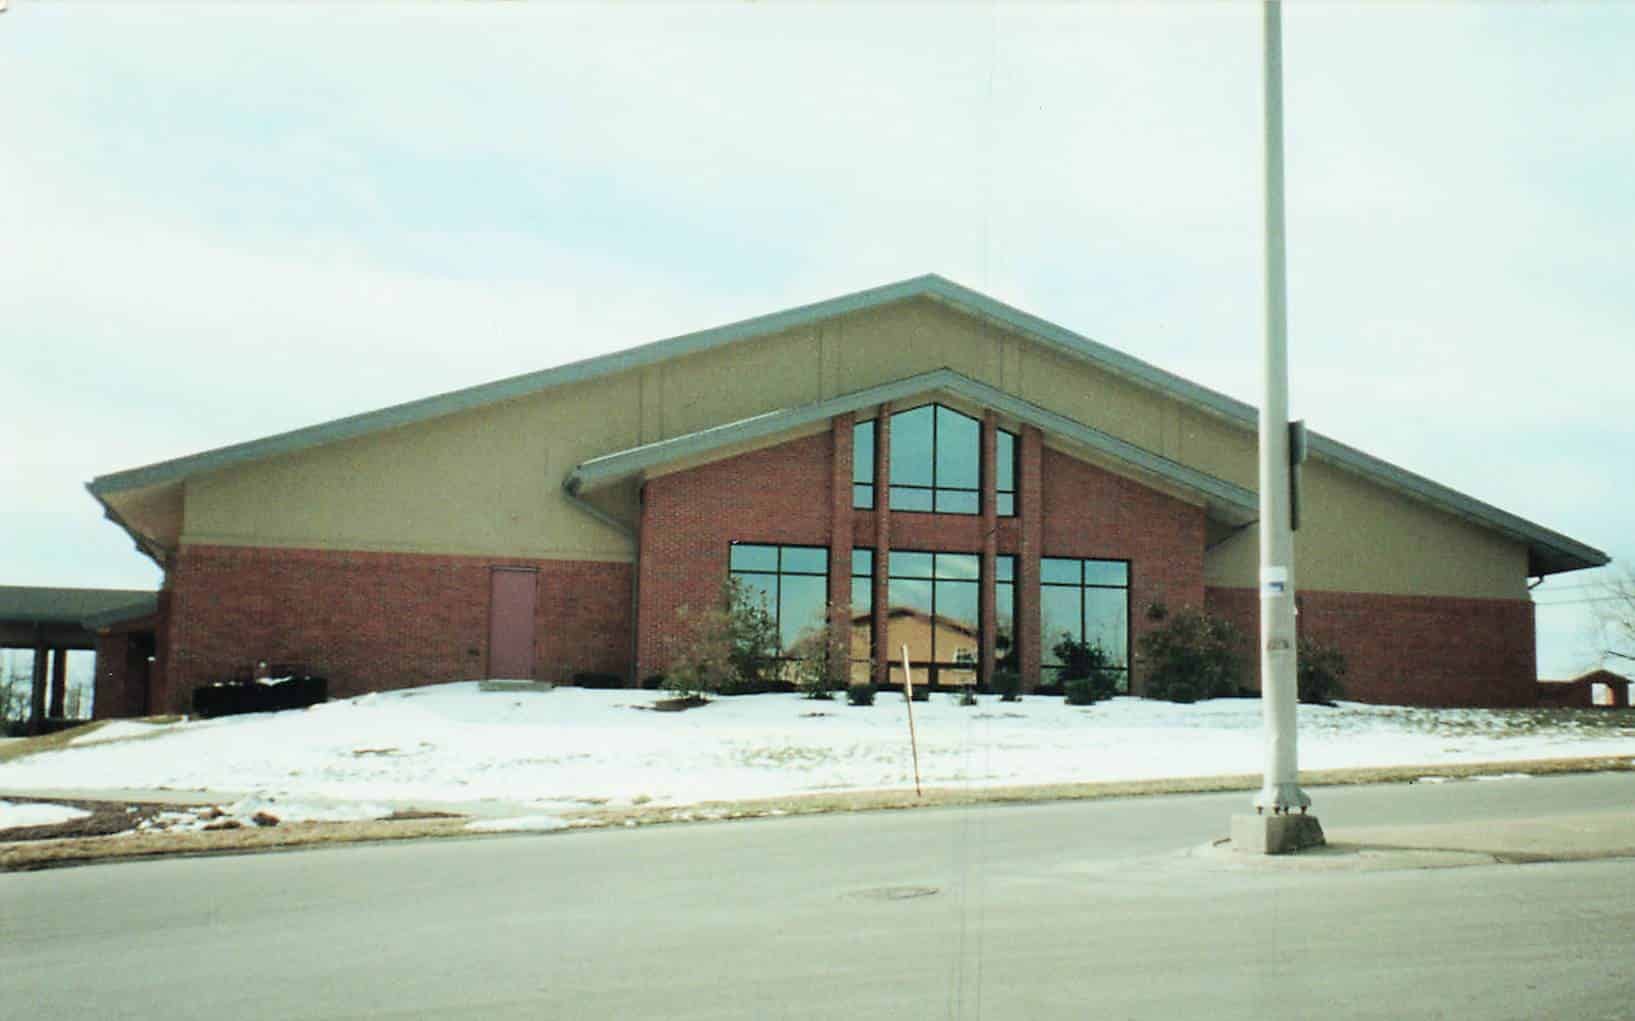 The Jessamine County Public Library at 600 S. Main Street shortly after it was completed in 1996.